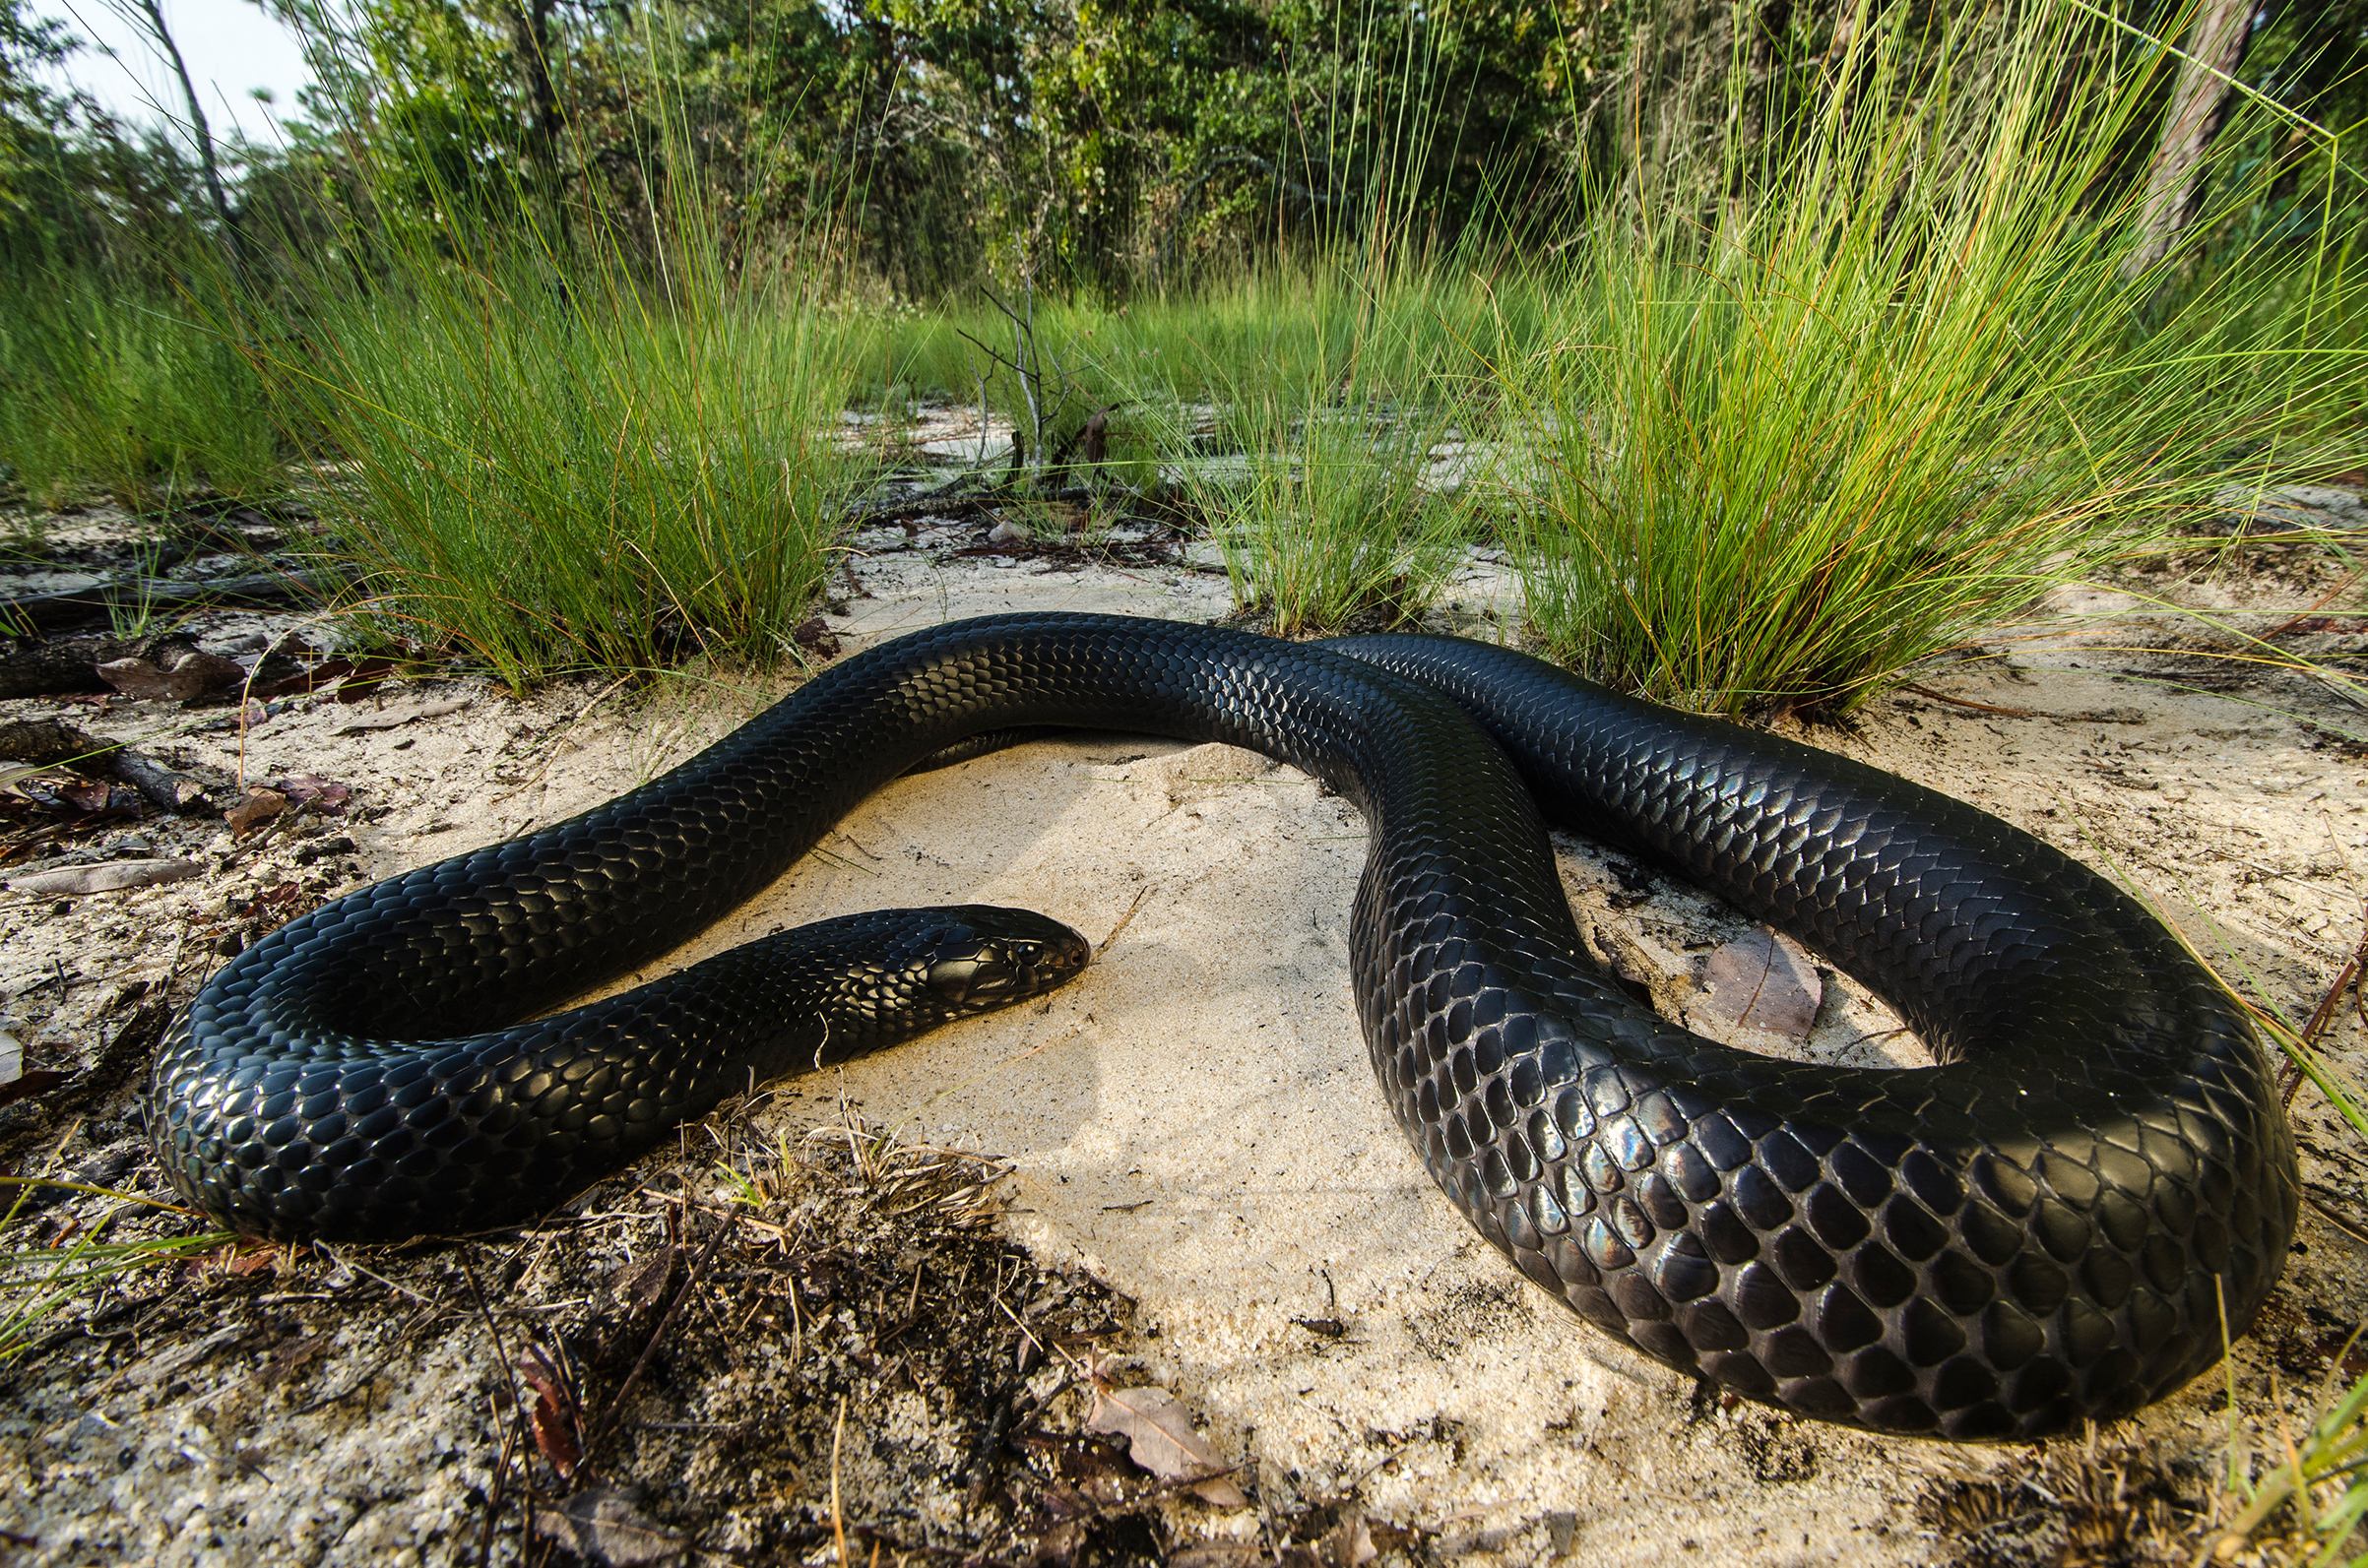 The eastern indigo snake (Drymarchon couperi) is a species of large nonvenomous colubrid snake native to the Eastern United States. It is of note as being the longest native snake species in the U.S. (Danita Delimont—Gallo Images/Getty Images)